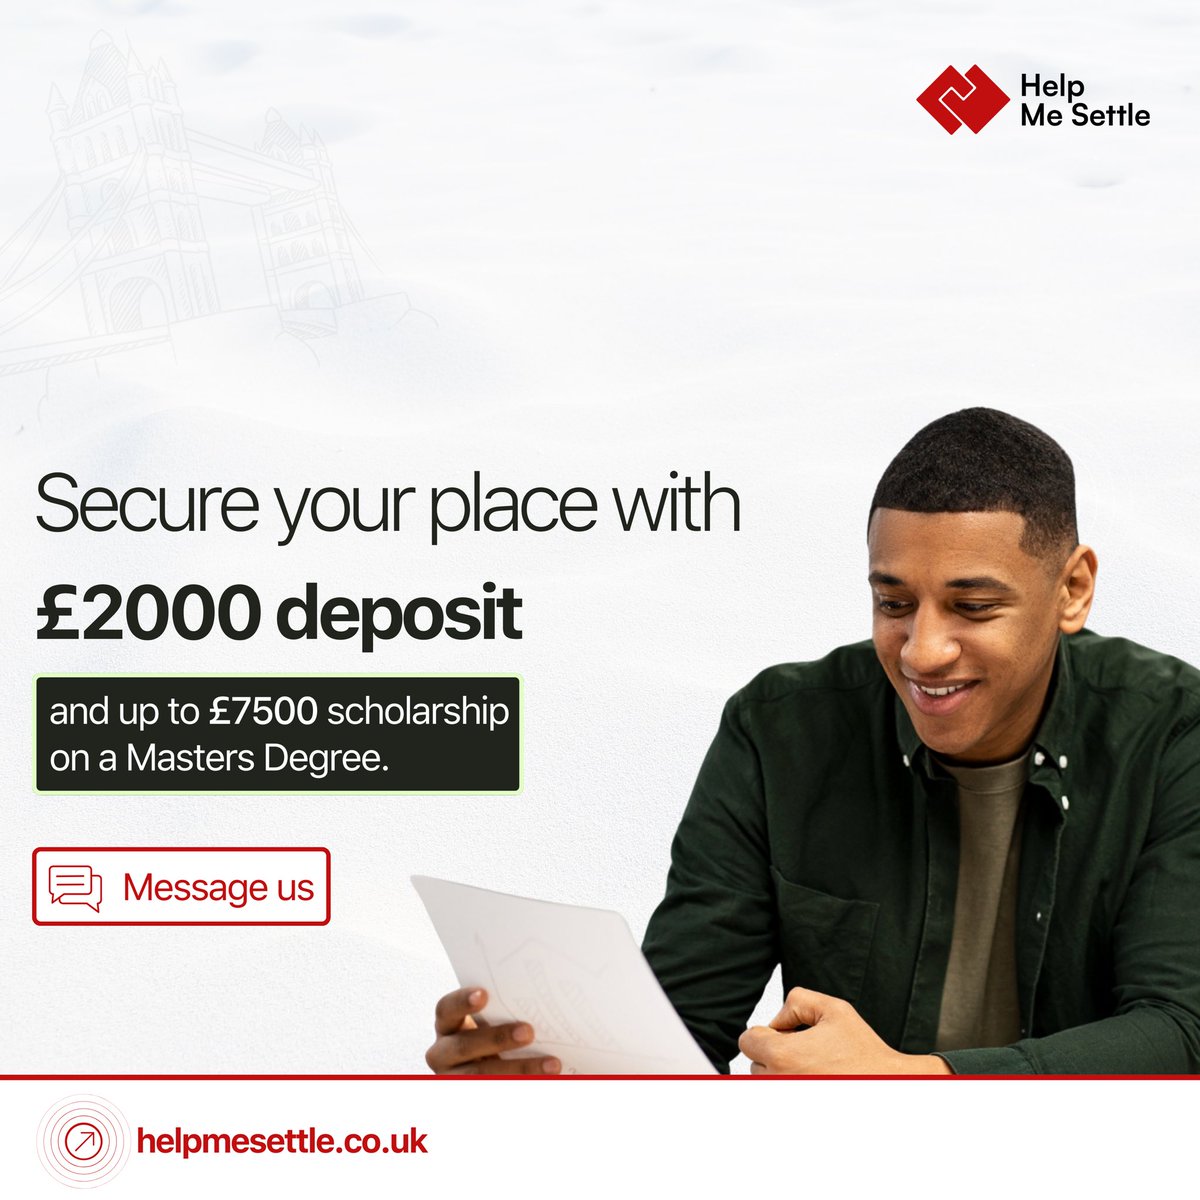 Looking for a University with low deposit fees and lots of scholarship opportunities? Drop us an email and secure your place with a UK University.

#lowdeposit #lowtuition #scholarship #ukuniversities #studyinuk